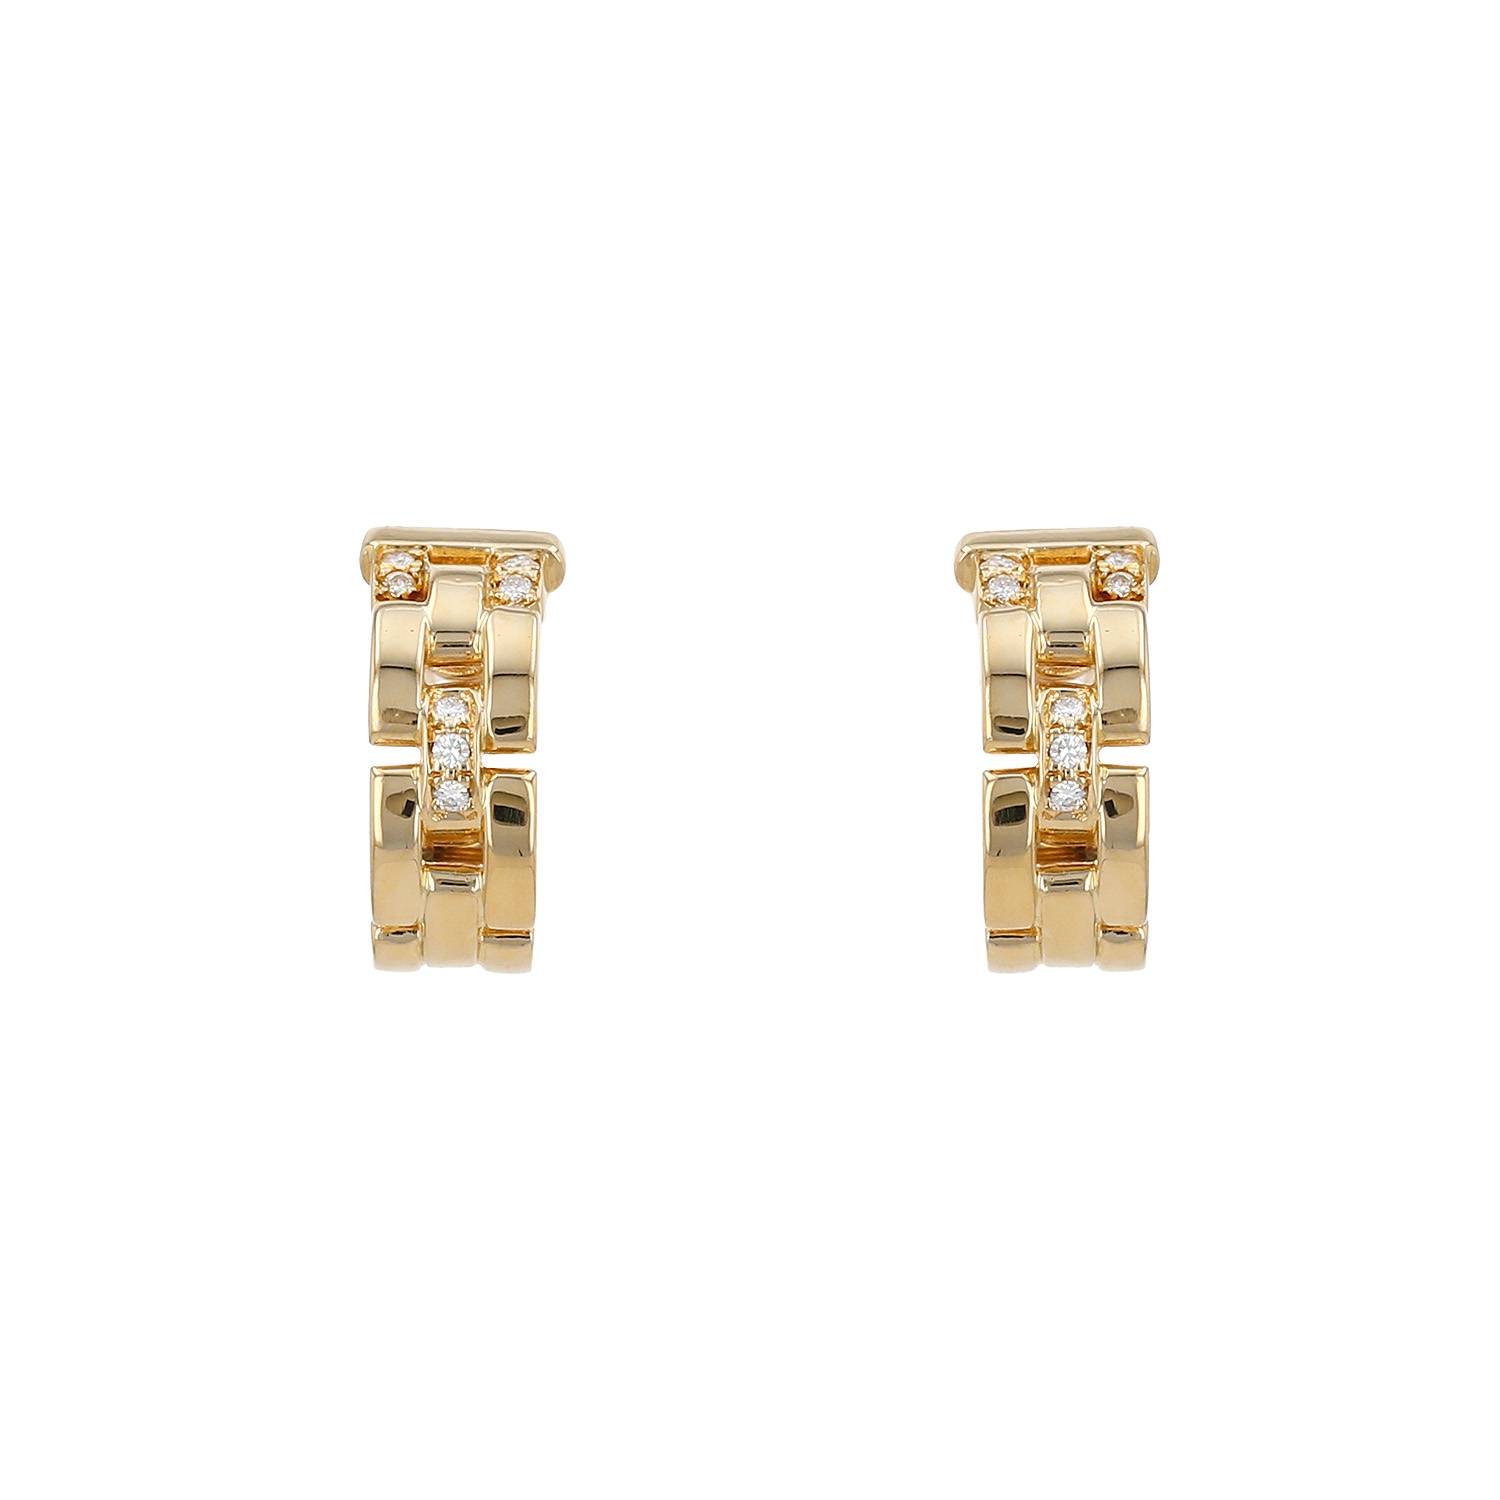 Maillon Panthère Earrings In Yellow And Diamonds